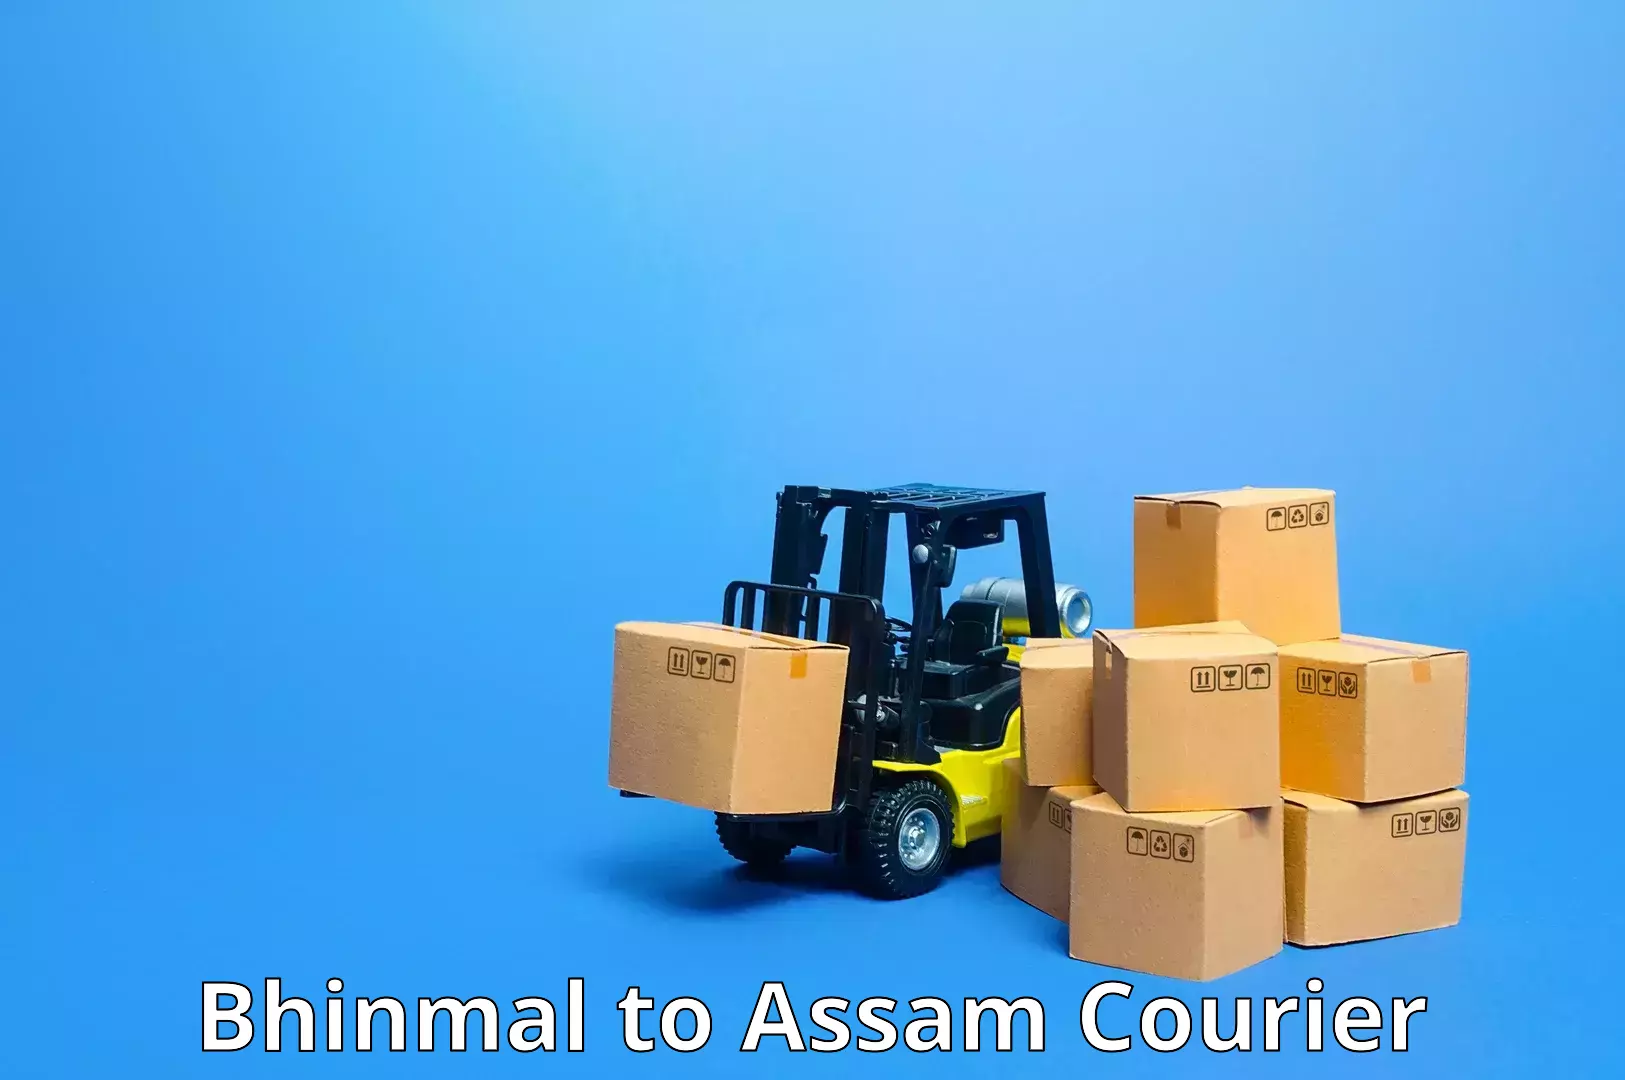 Sustainable shipping practices Bhinmal to Karbi Anglong